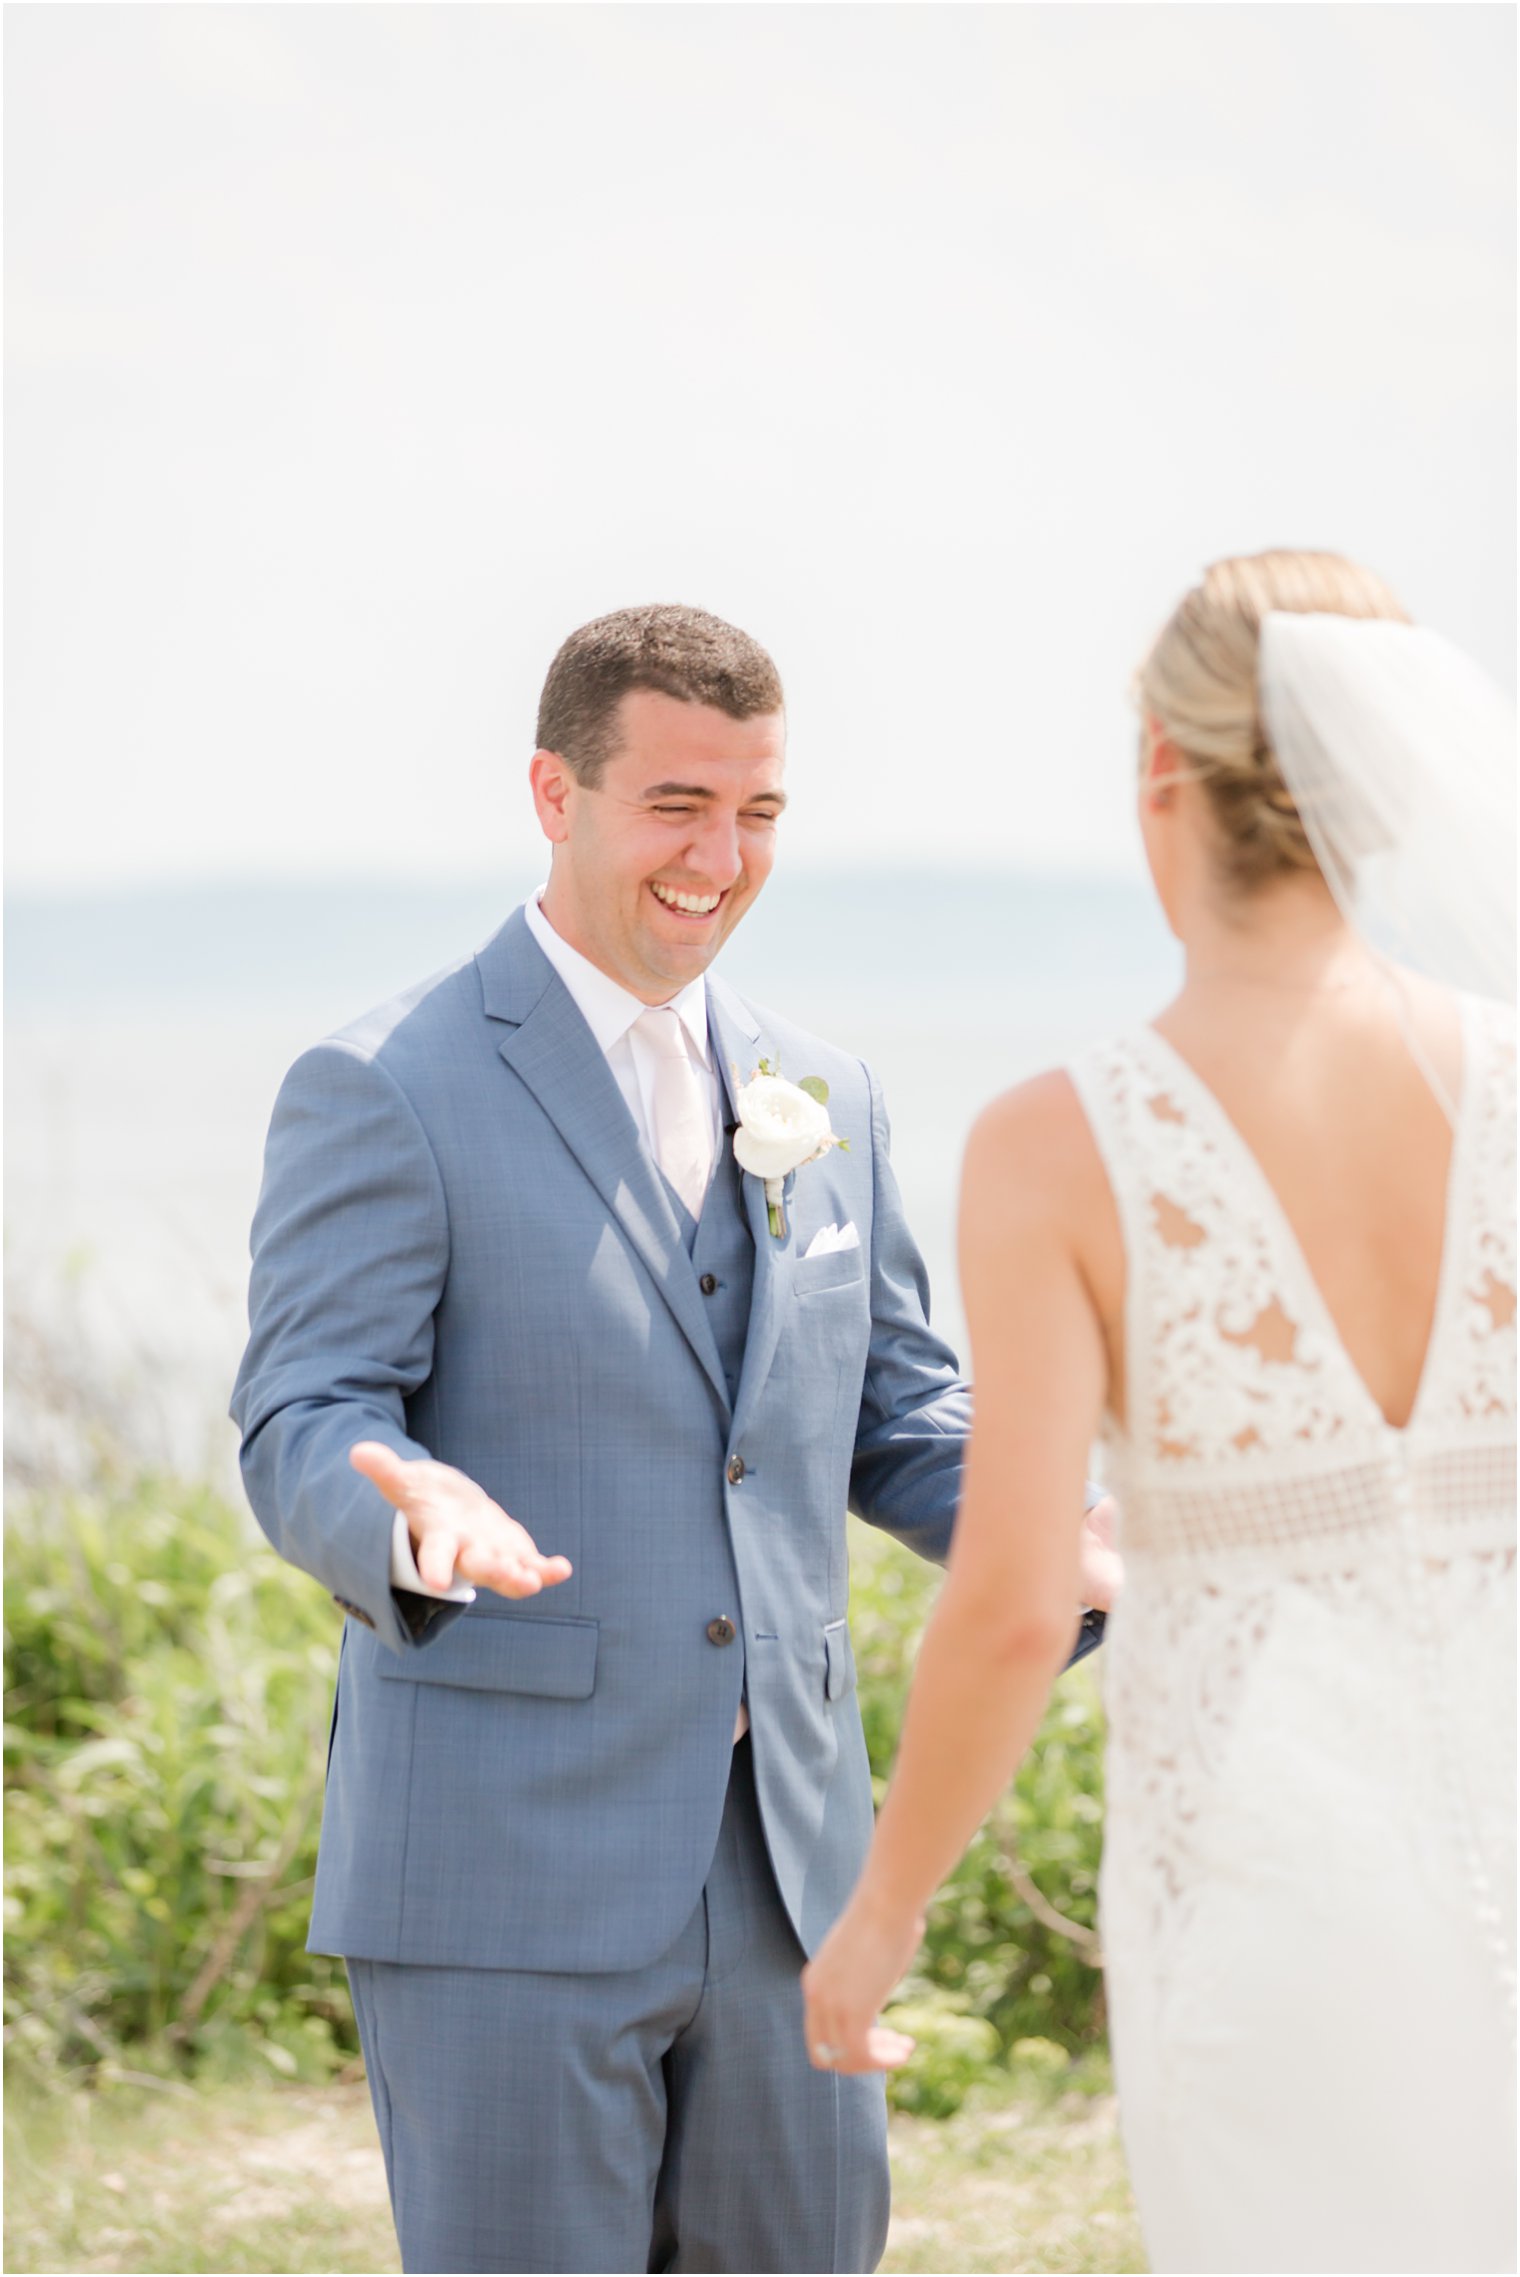 Sandy Hook Chapel wedding day first look photographed by Idalia Photography